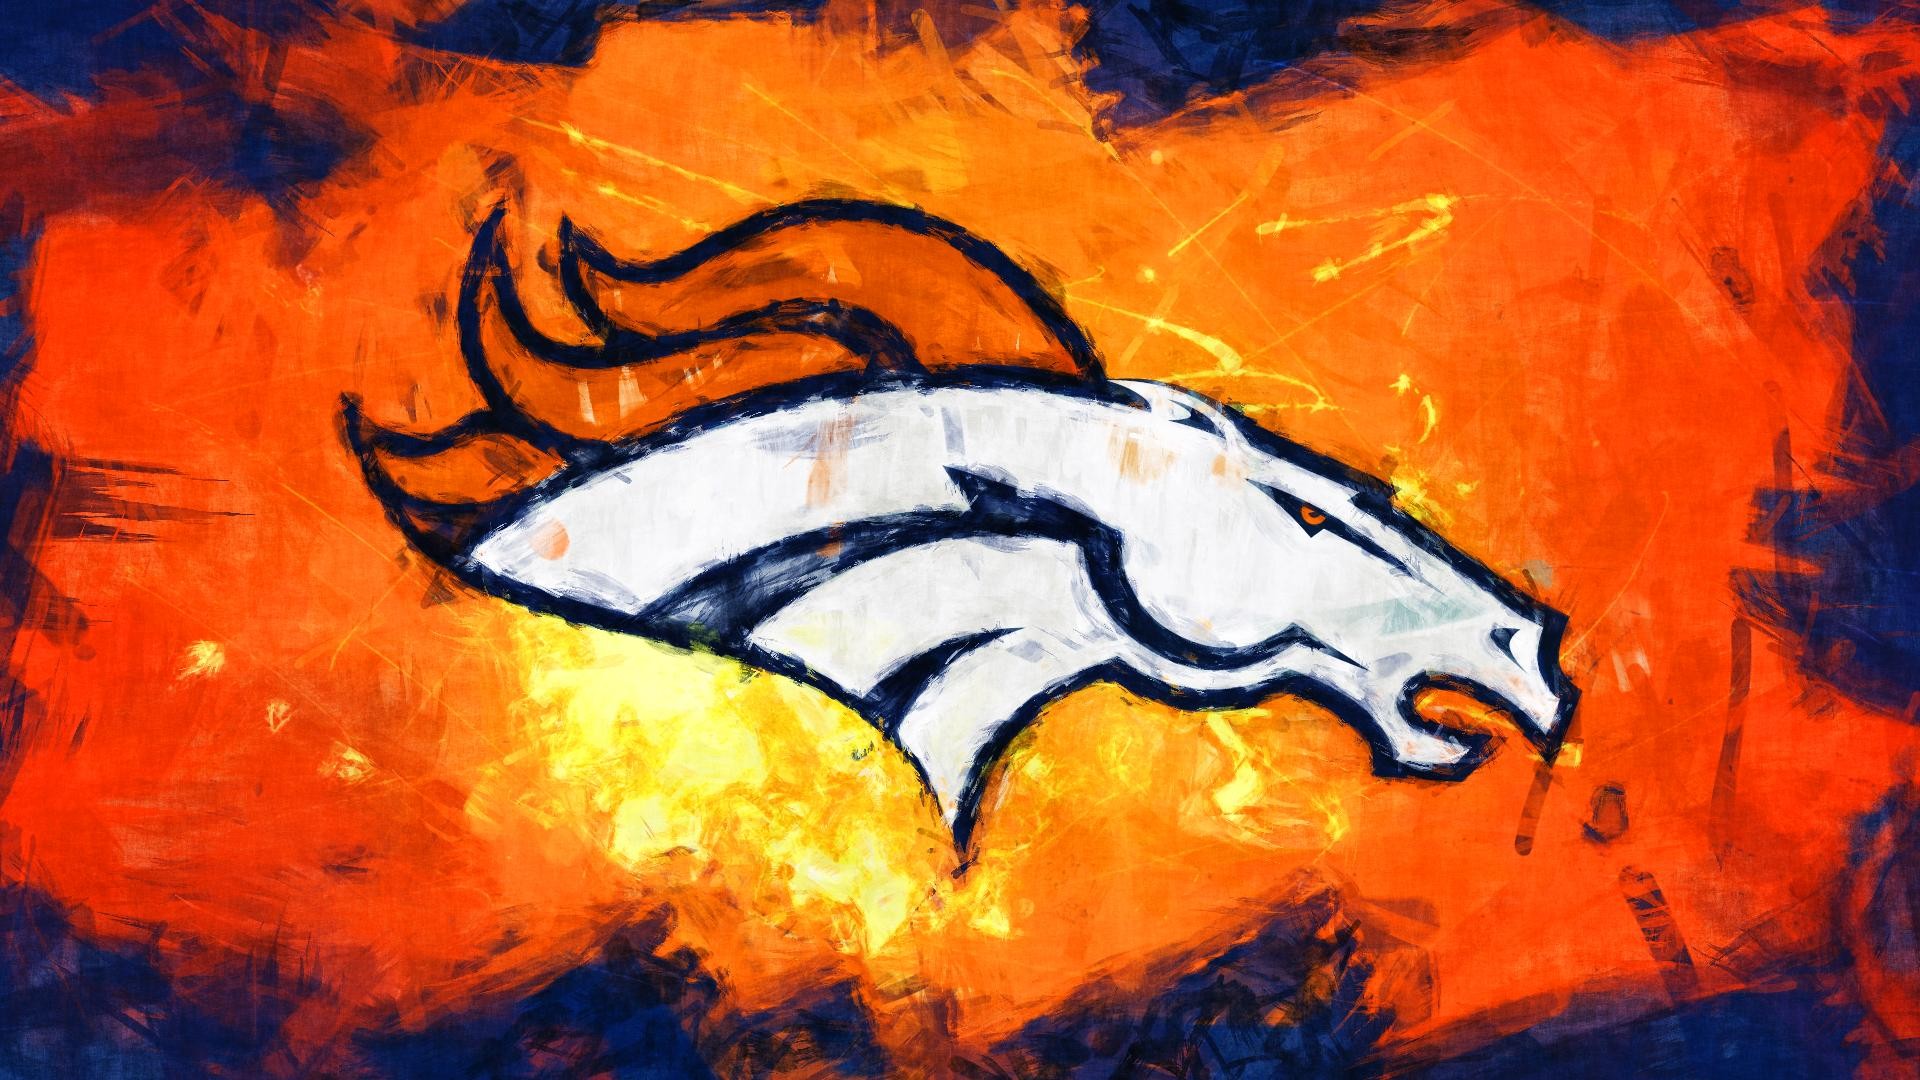 Denver Broncos Wallpaper in HD With high-resolution 1920X1080 pixel. Download and set as wallpaper for Desktop Computer, Apple iPhone X, XS Max, XR, 8, 7, 6, SE, iPad, Android